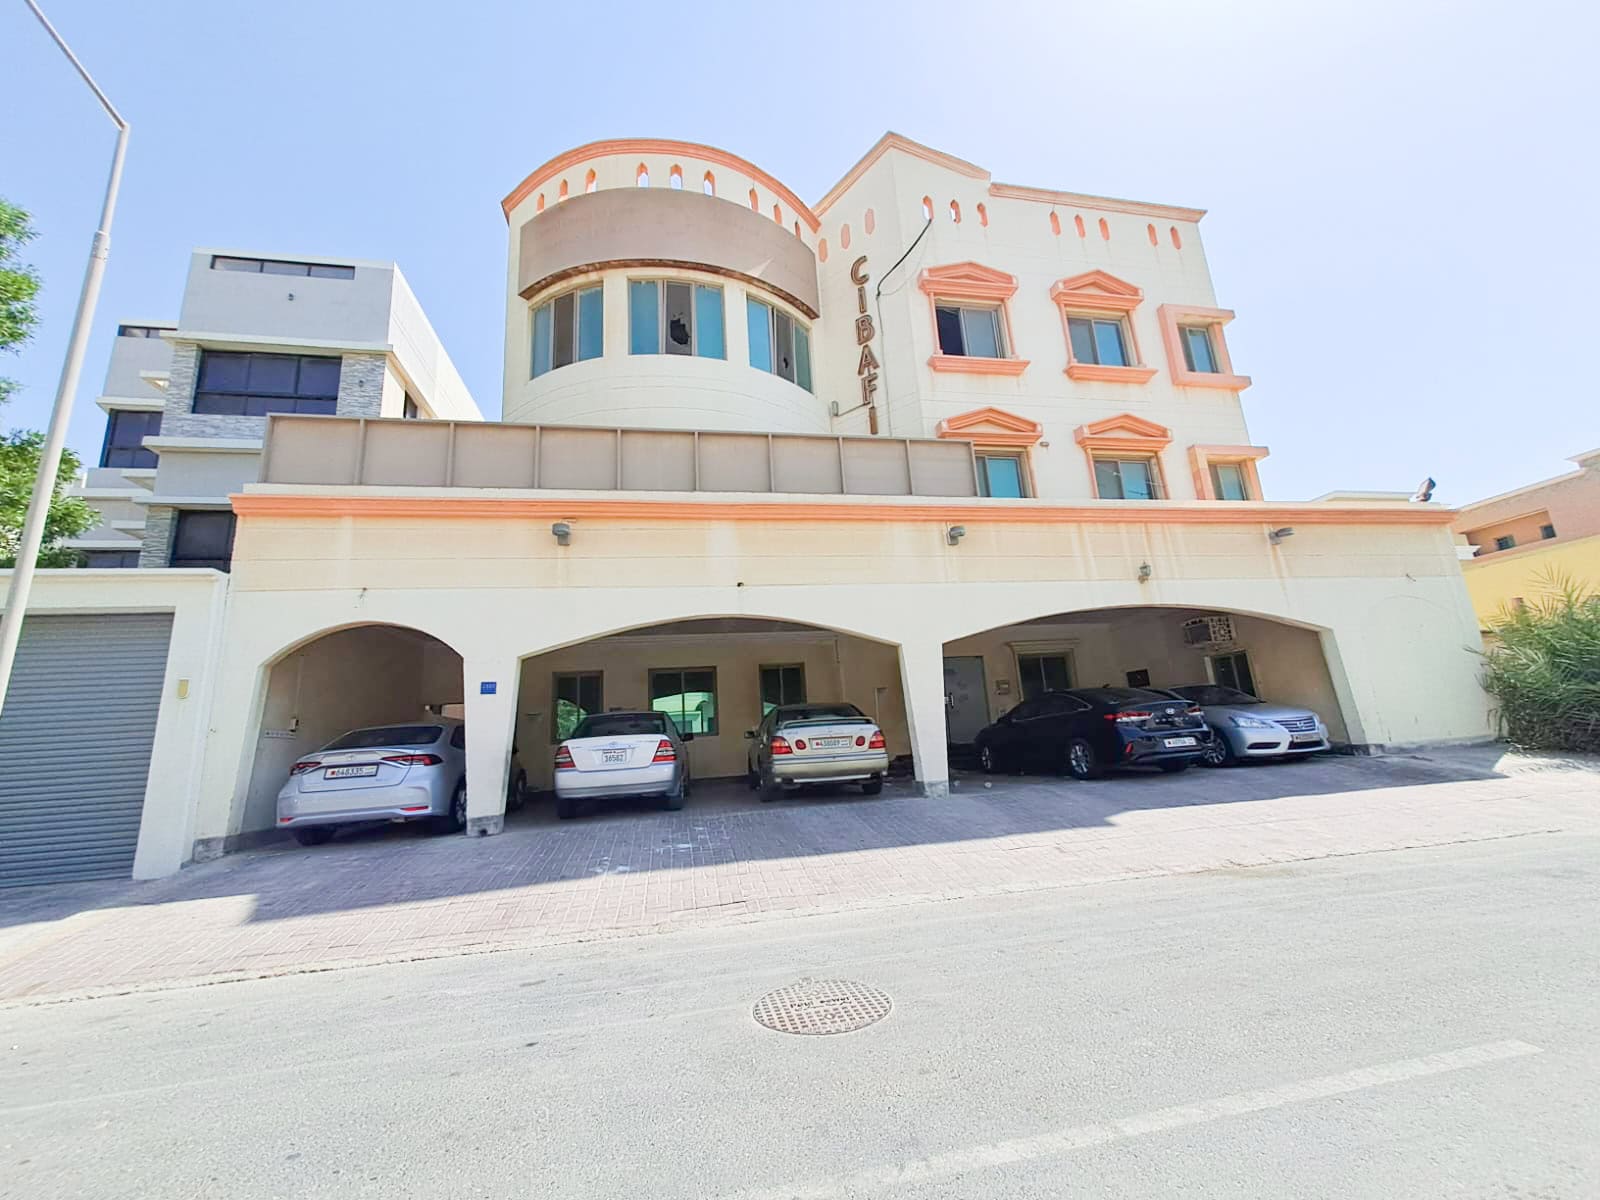 A building for sale with cars parked in front of it in Busaiteen.